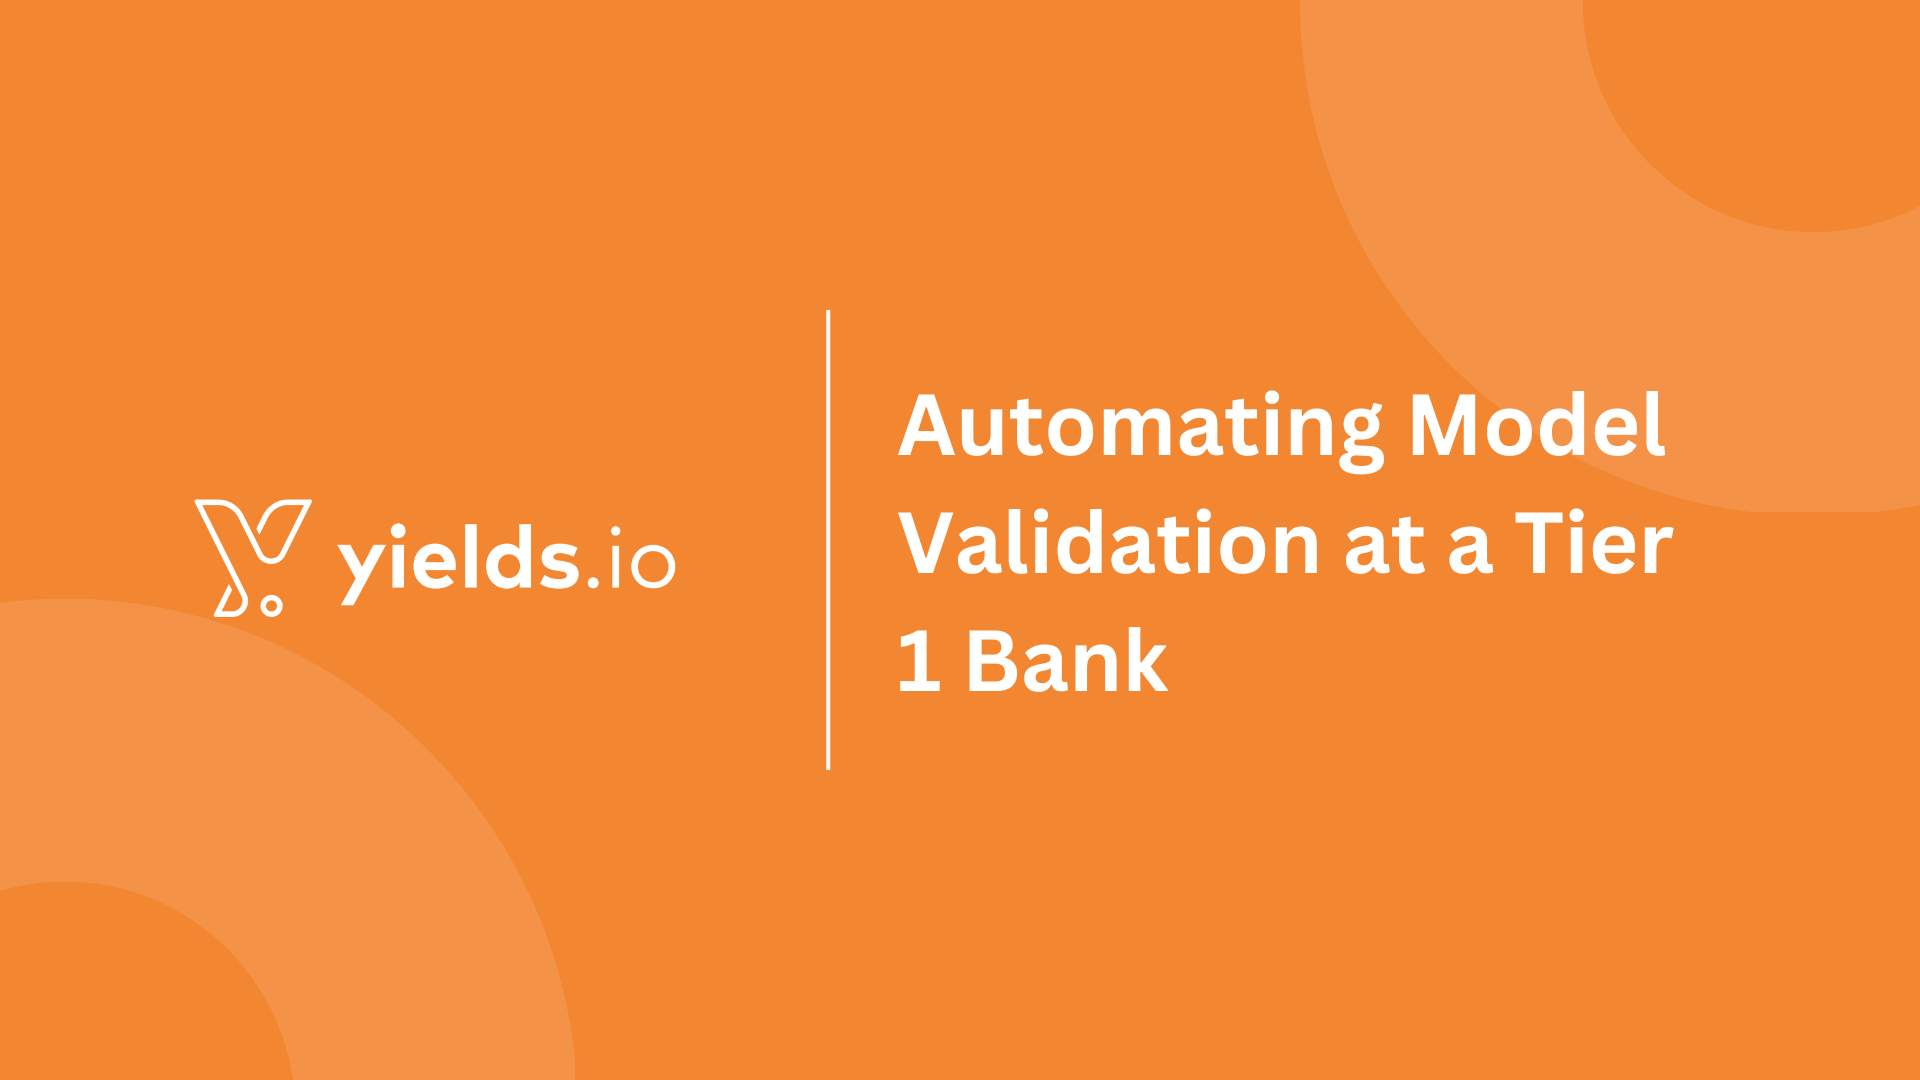 Automating ModelValidation at a Tier 1 Bank